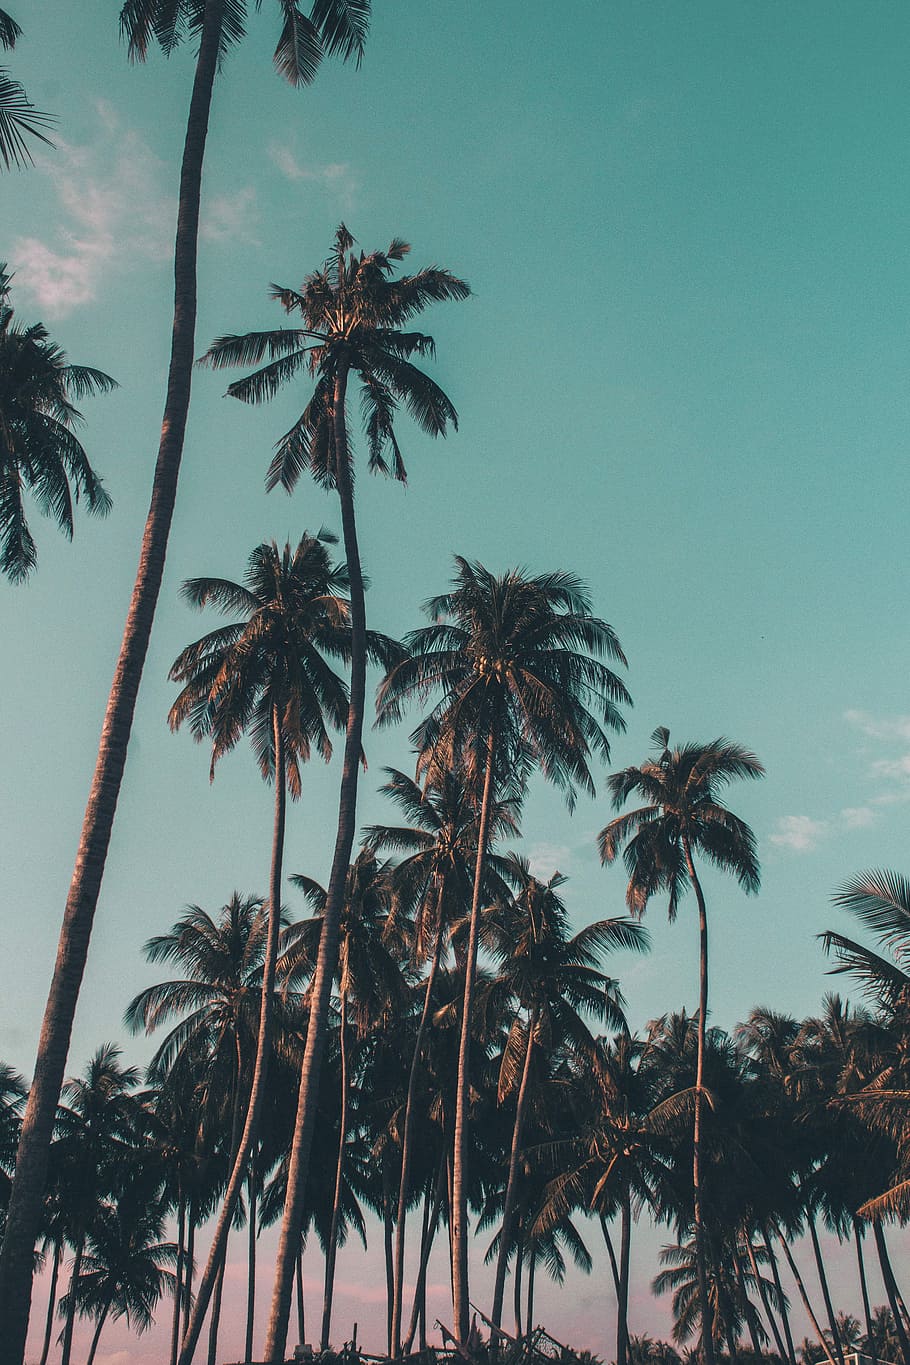 Palm trees in the sunset - Coconut